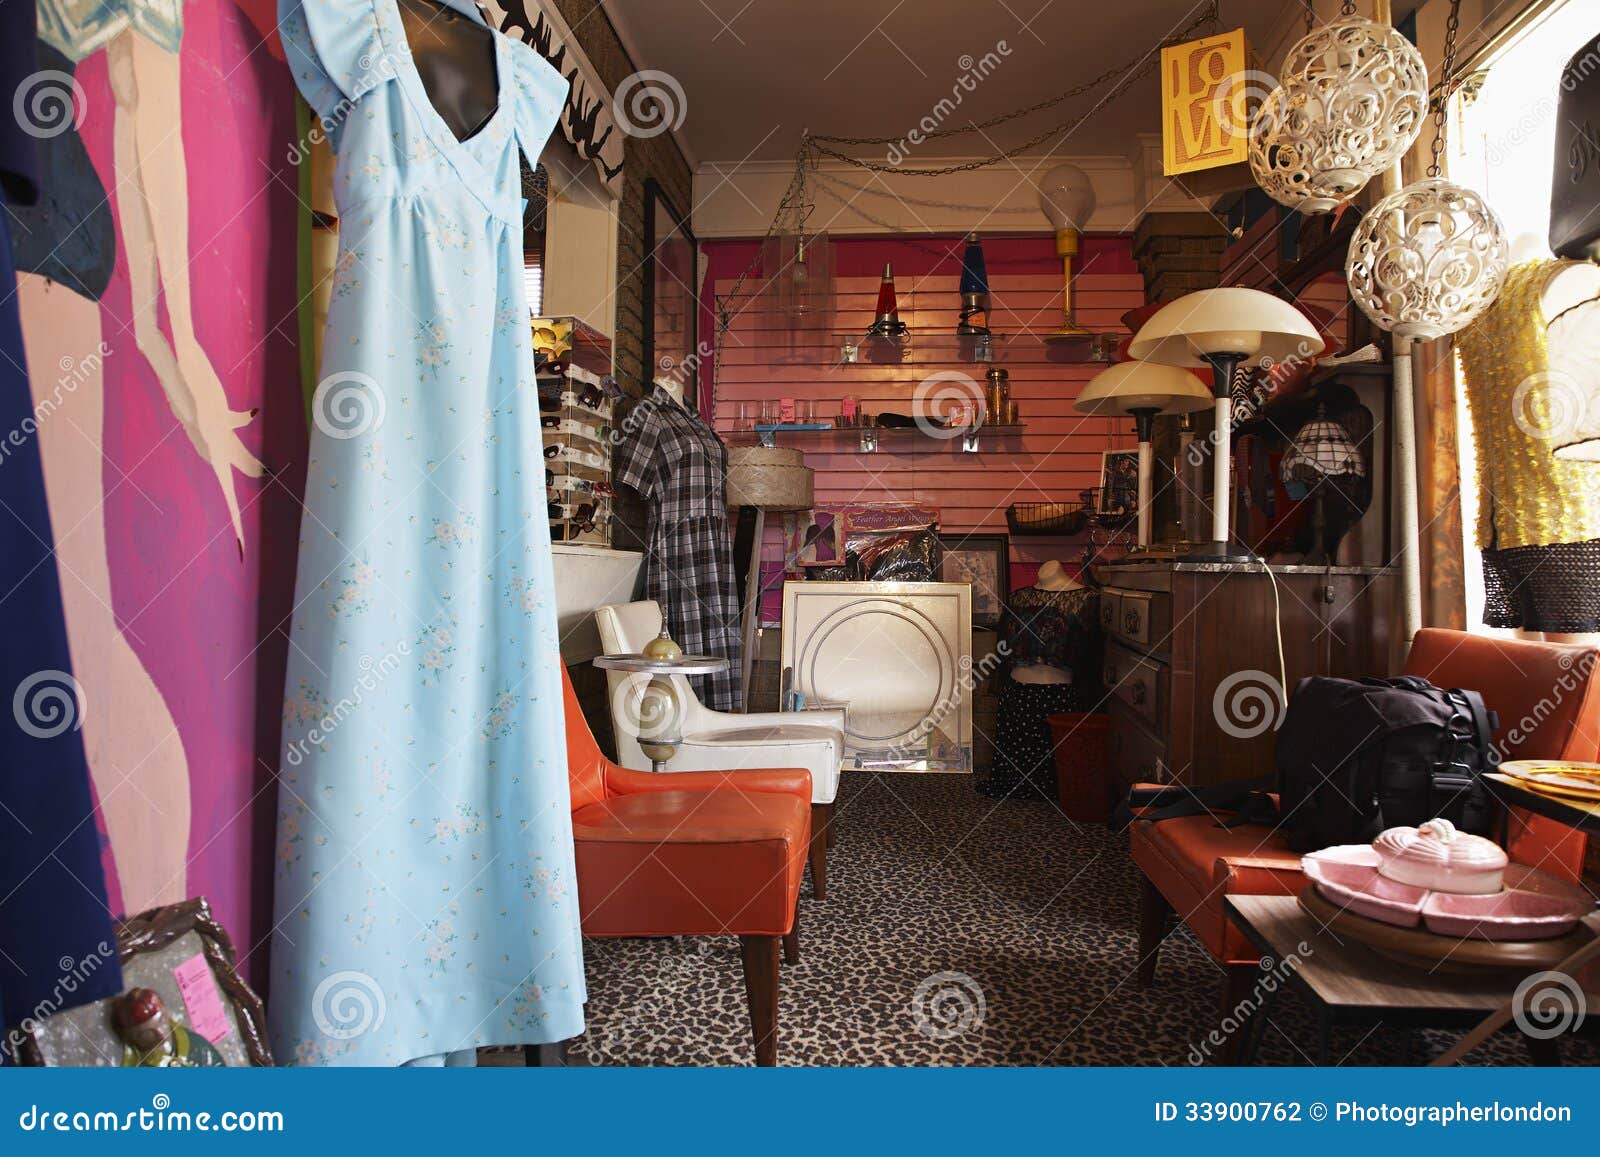 clothing and furniture in second hand store